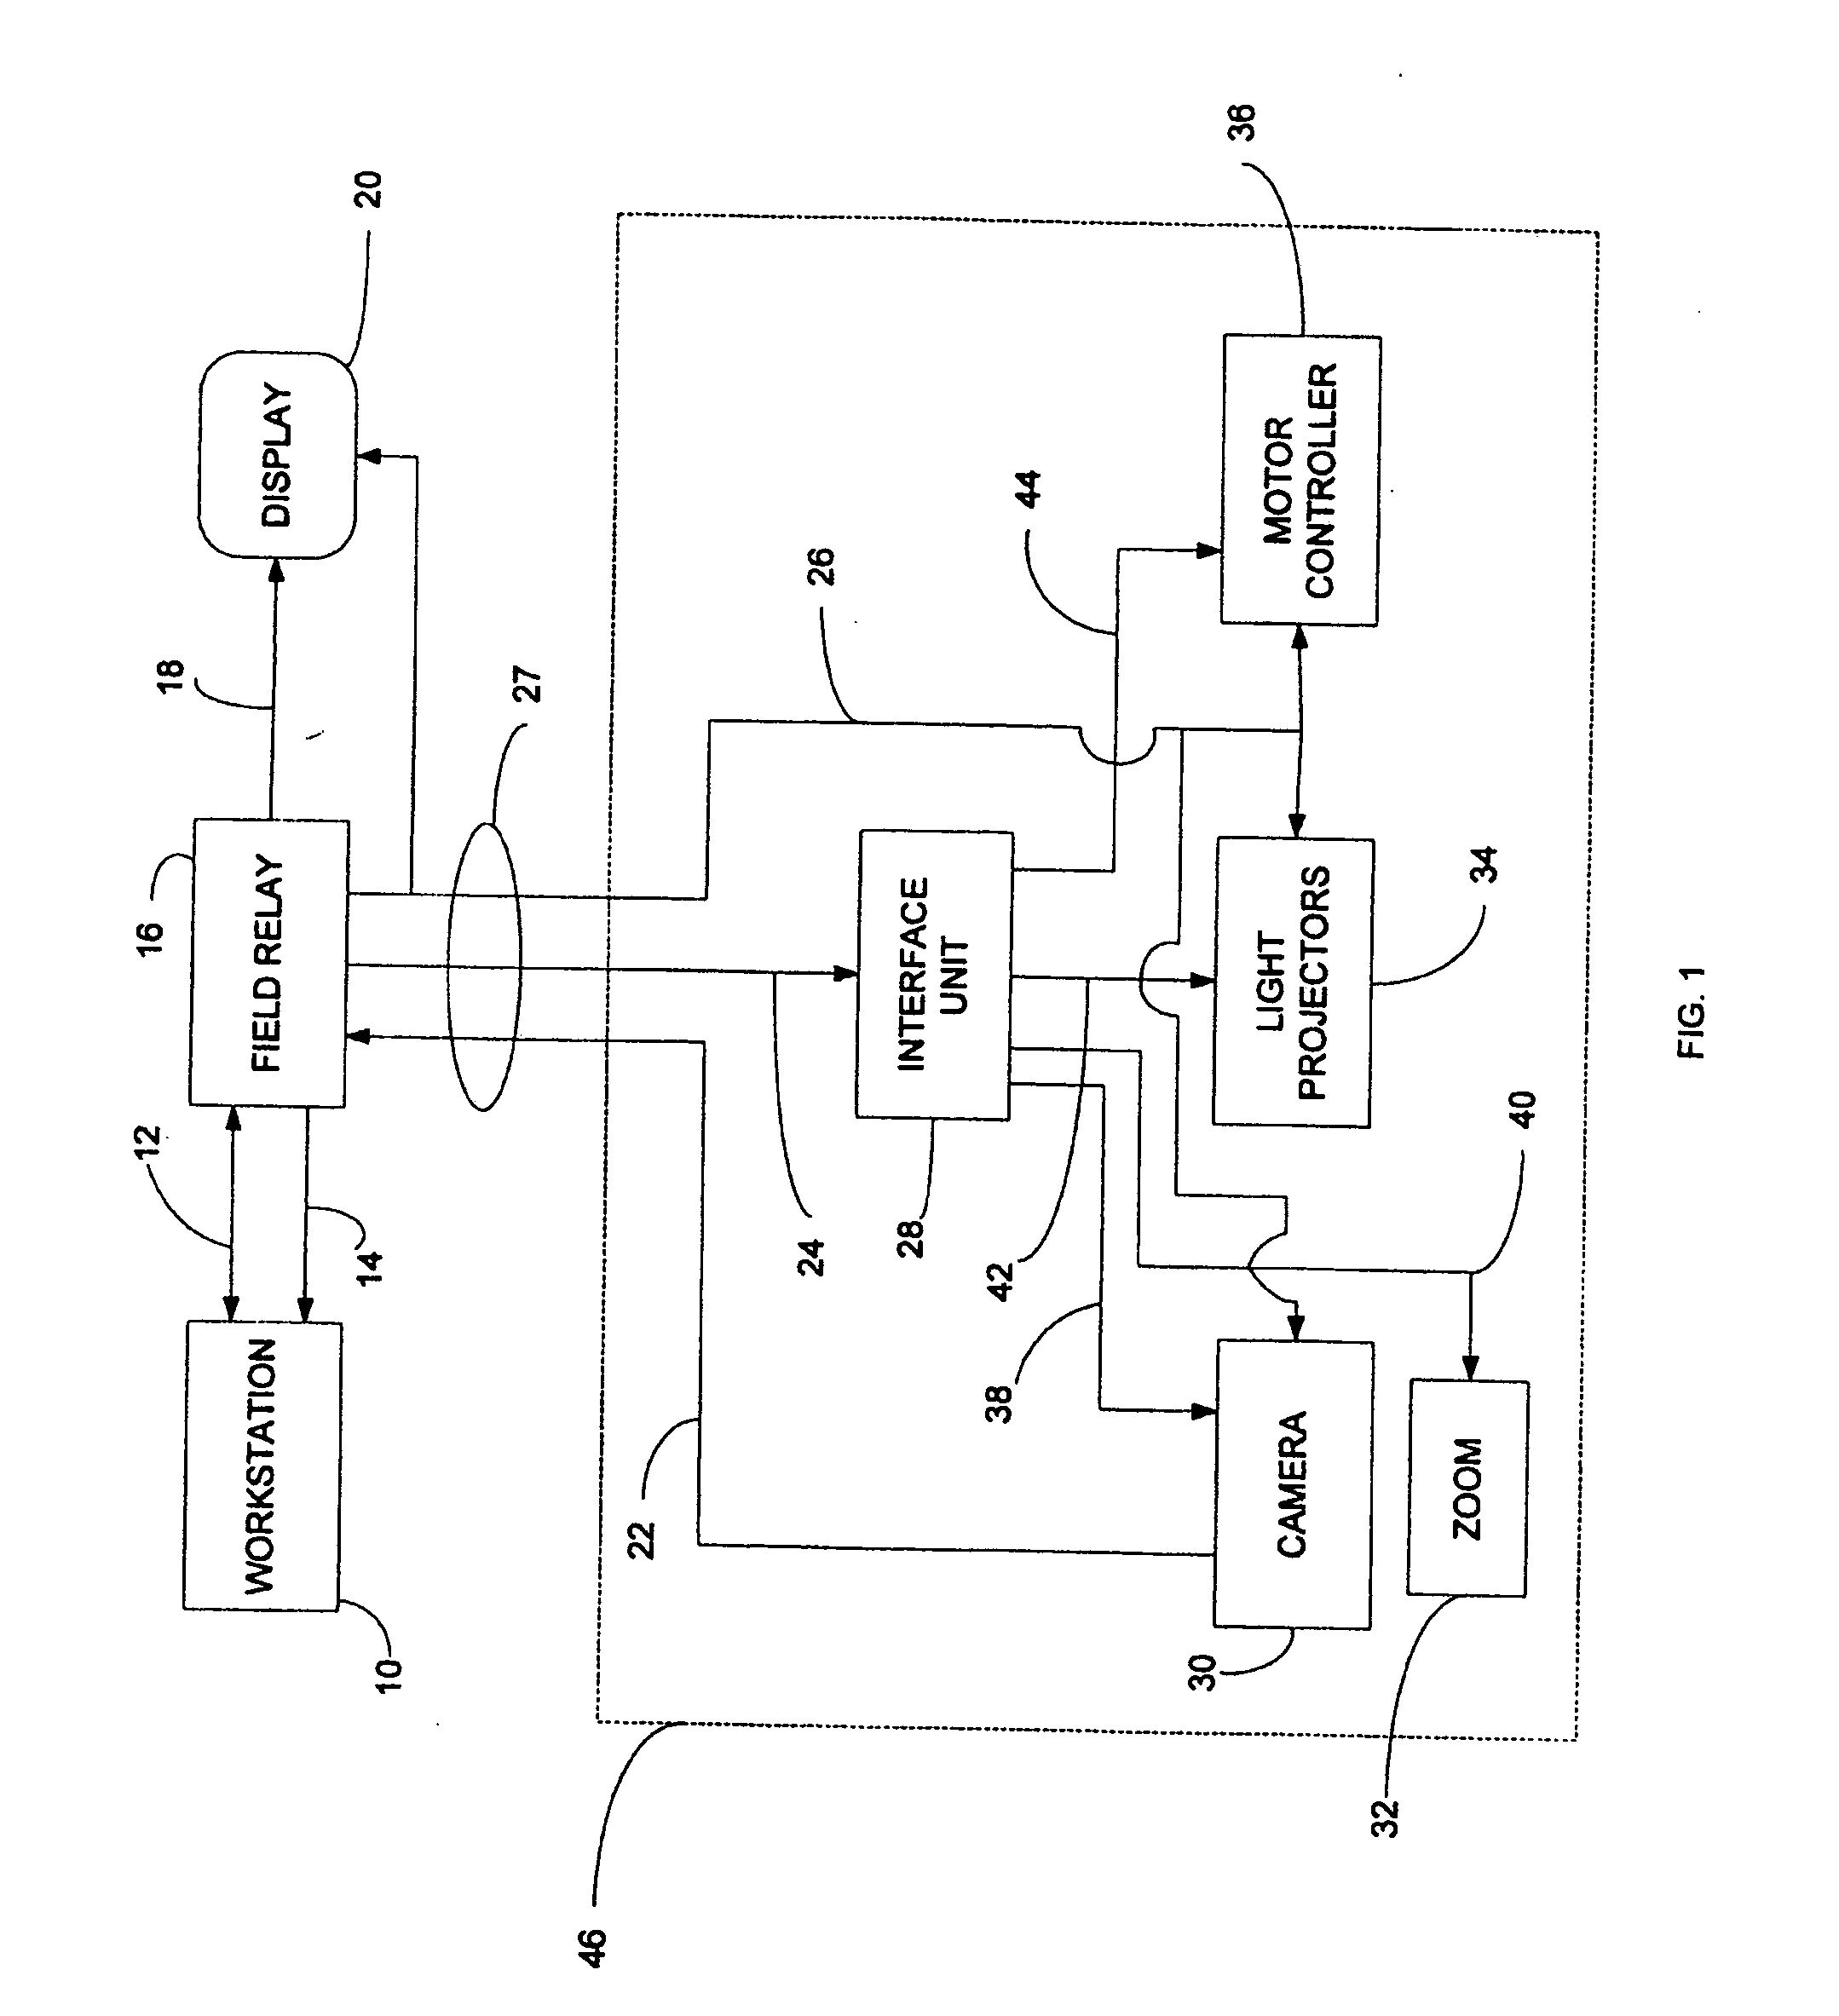 Apparatus and method for remote inspection of a structure using a special imaging system